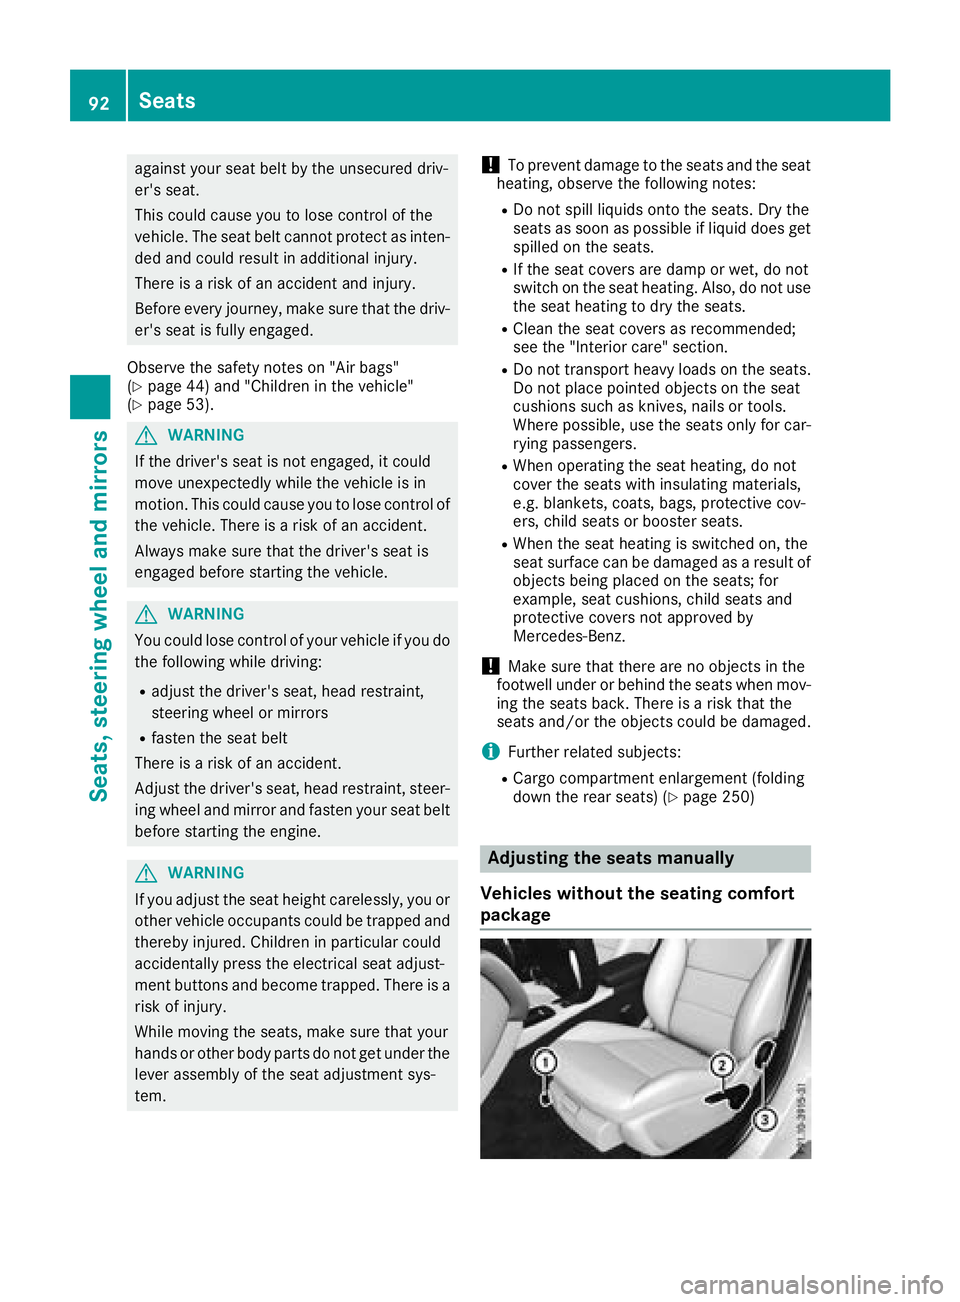 MERCEDES-BENZ GLA SUV 2018  Owners Manual against your seat belt by the unsecured driv-
er's seat.
This could cause you to lose control of the
vehicle. The seat belt cannot protect as inten-
ded and could result in additional injury.
Ther